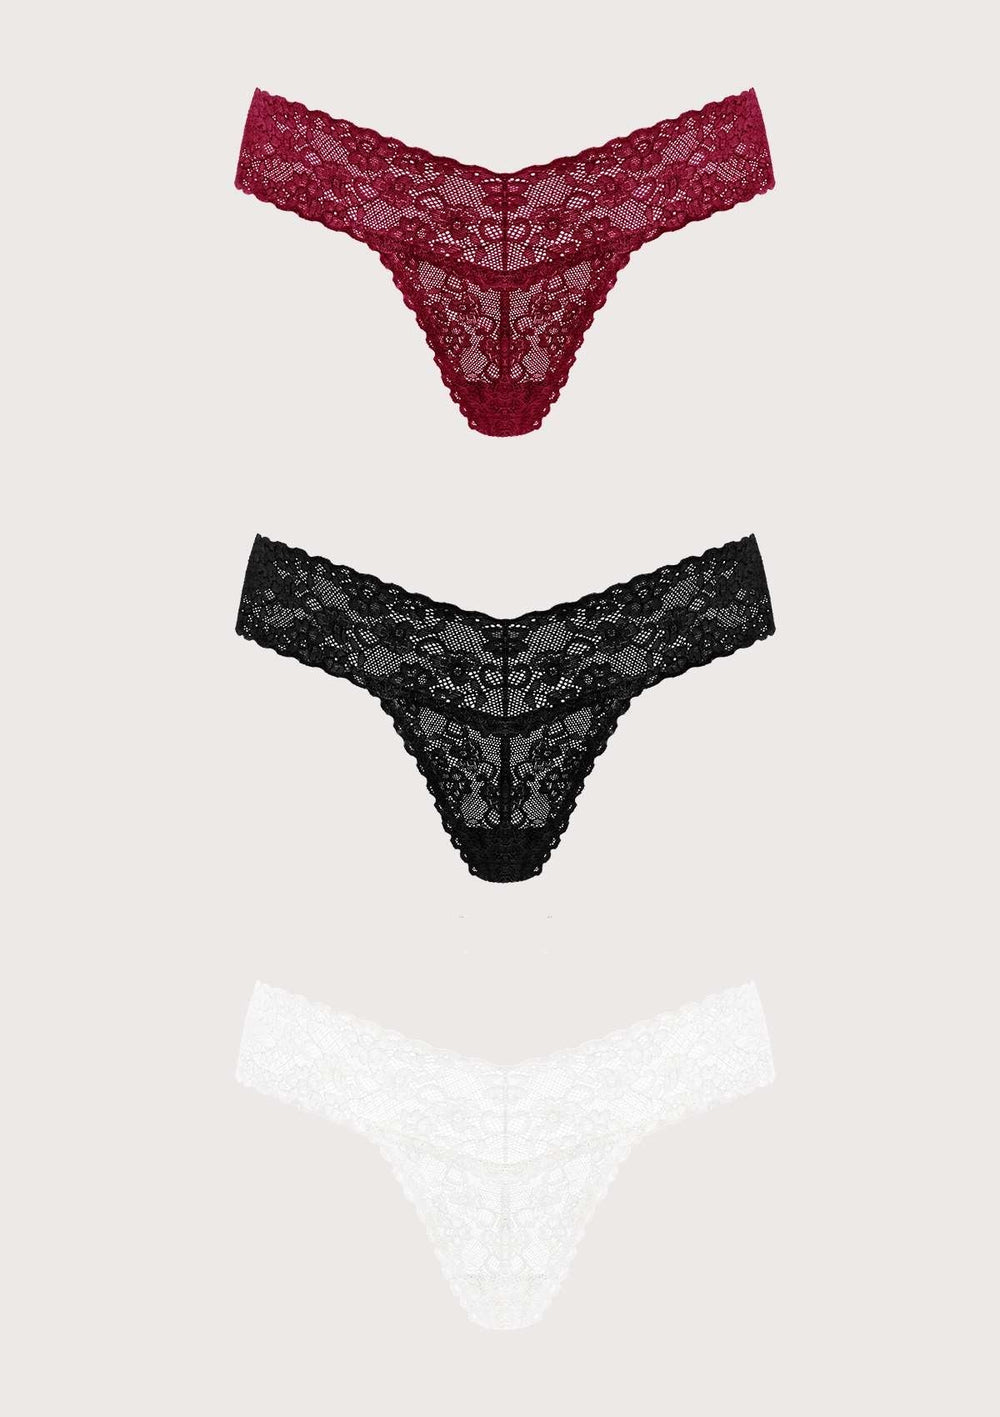 Hipster Sexy Panties for Women, Womens Cheeky Lace Cute Underwear, Soft  Floral Stretch Lingerie 